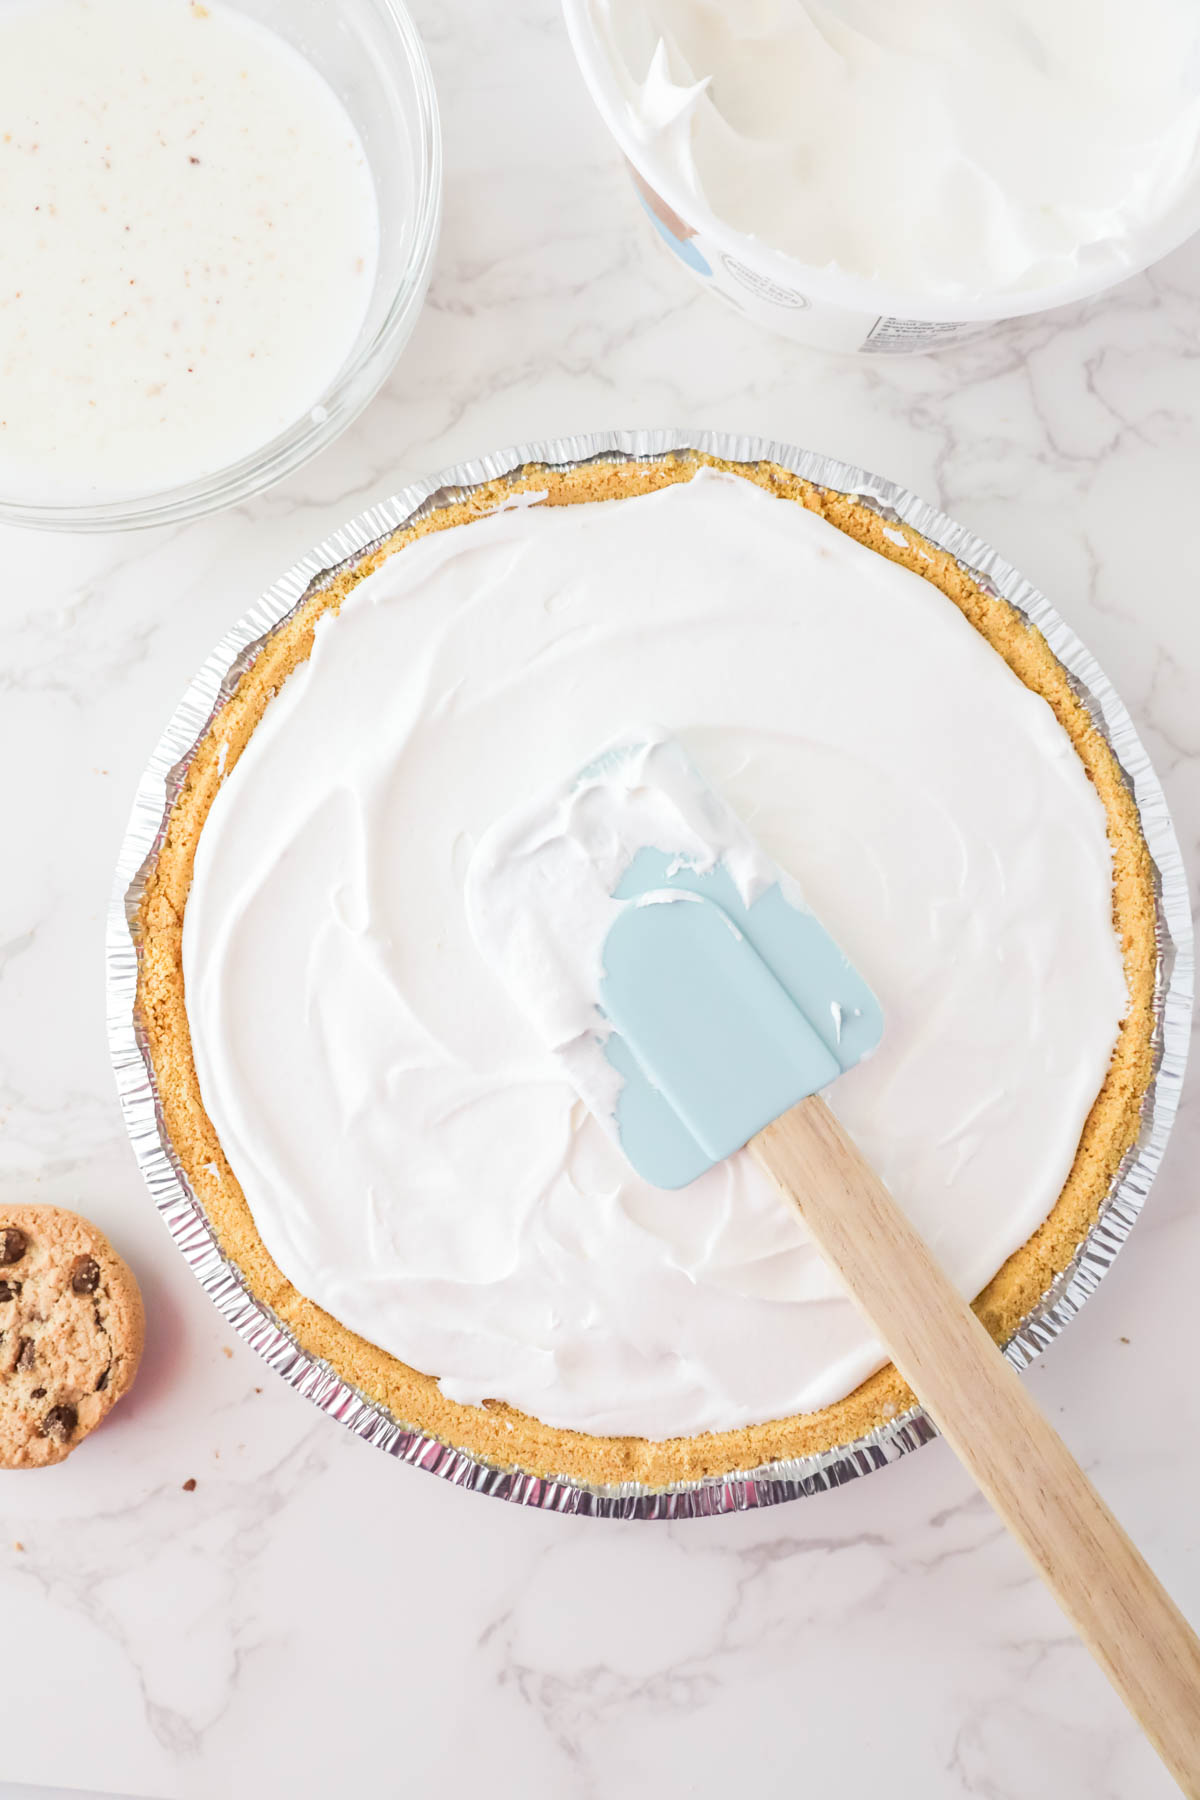 Spreading whipped cream on a pie crust with a spatula.